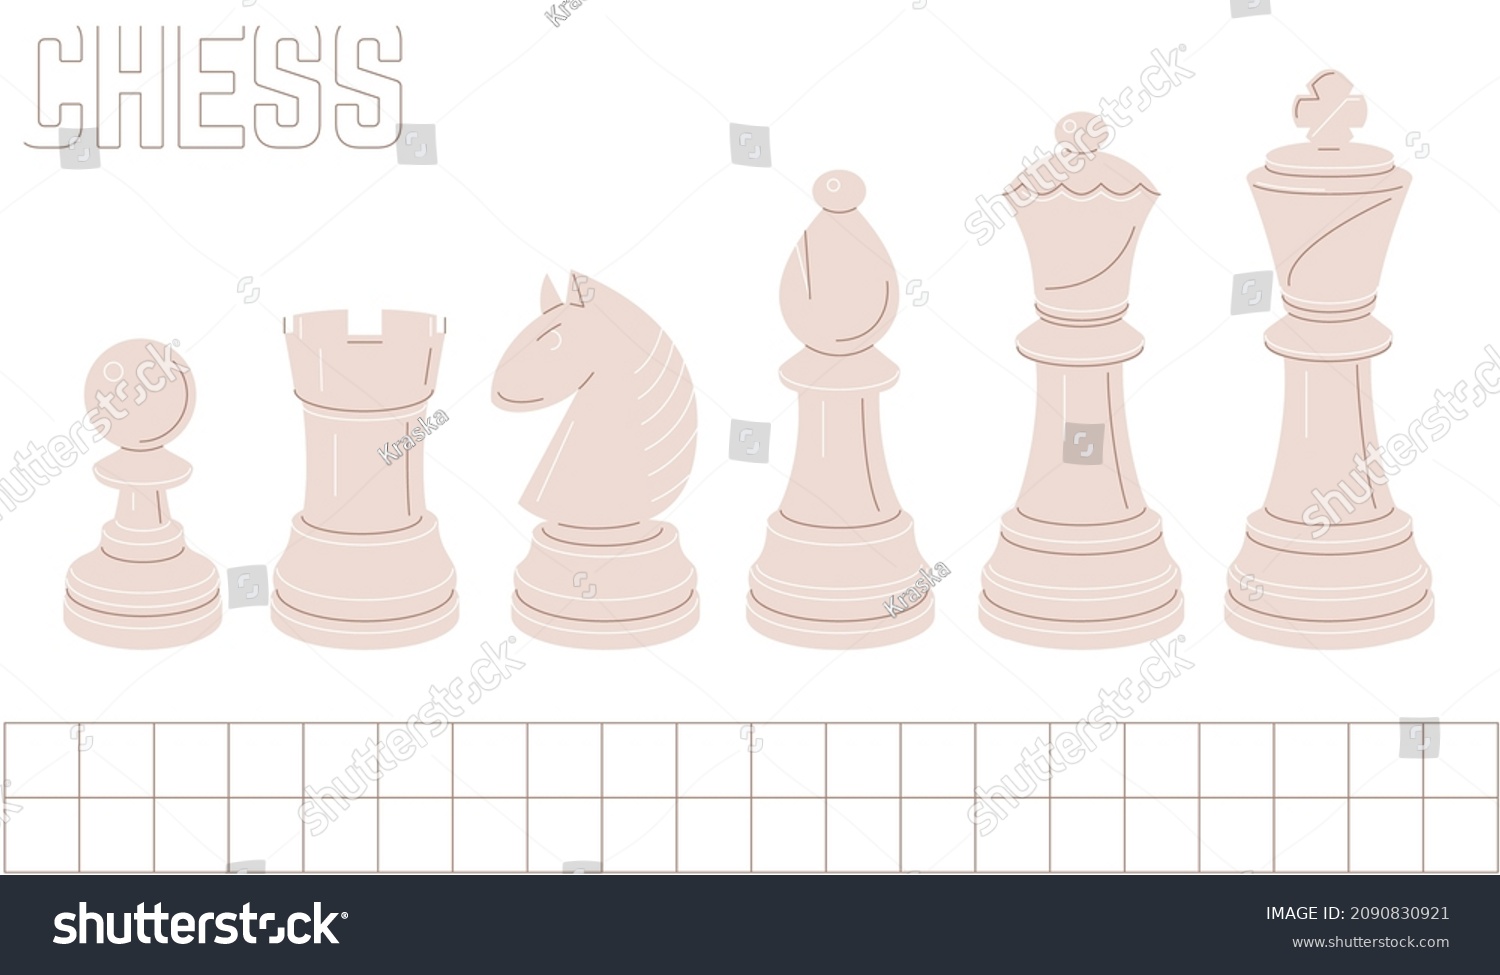 SVG of All chess pieces in a row. The white set. Kids friendly design. Vector illustration. svg